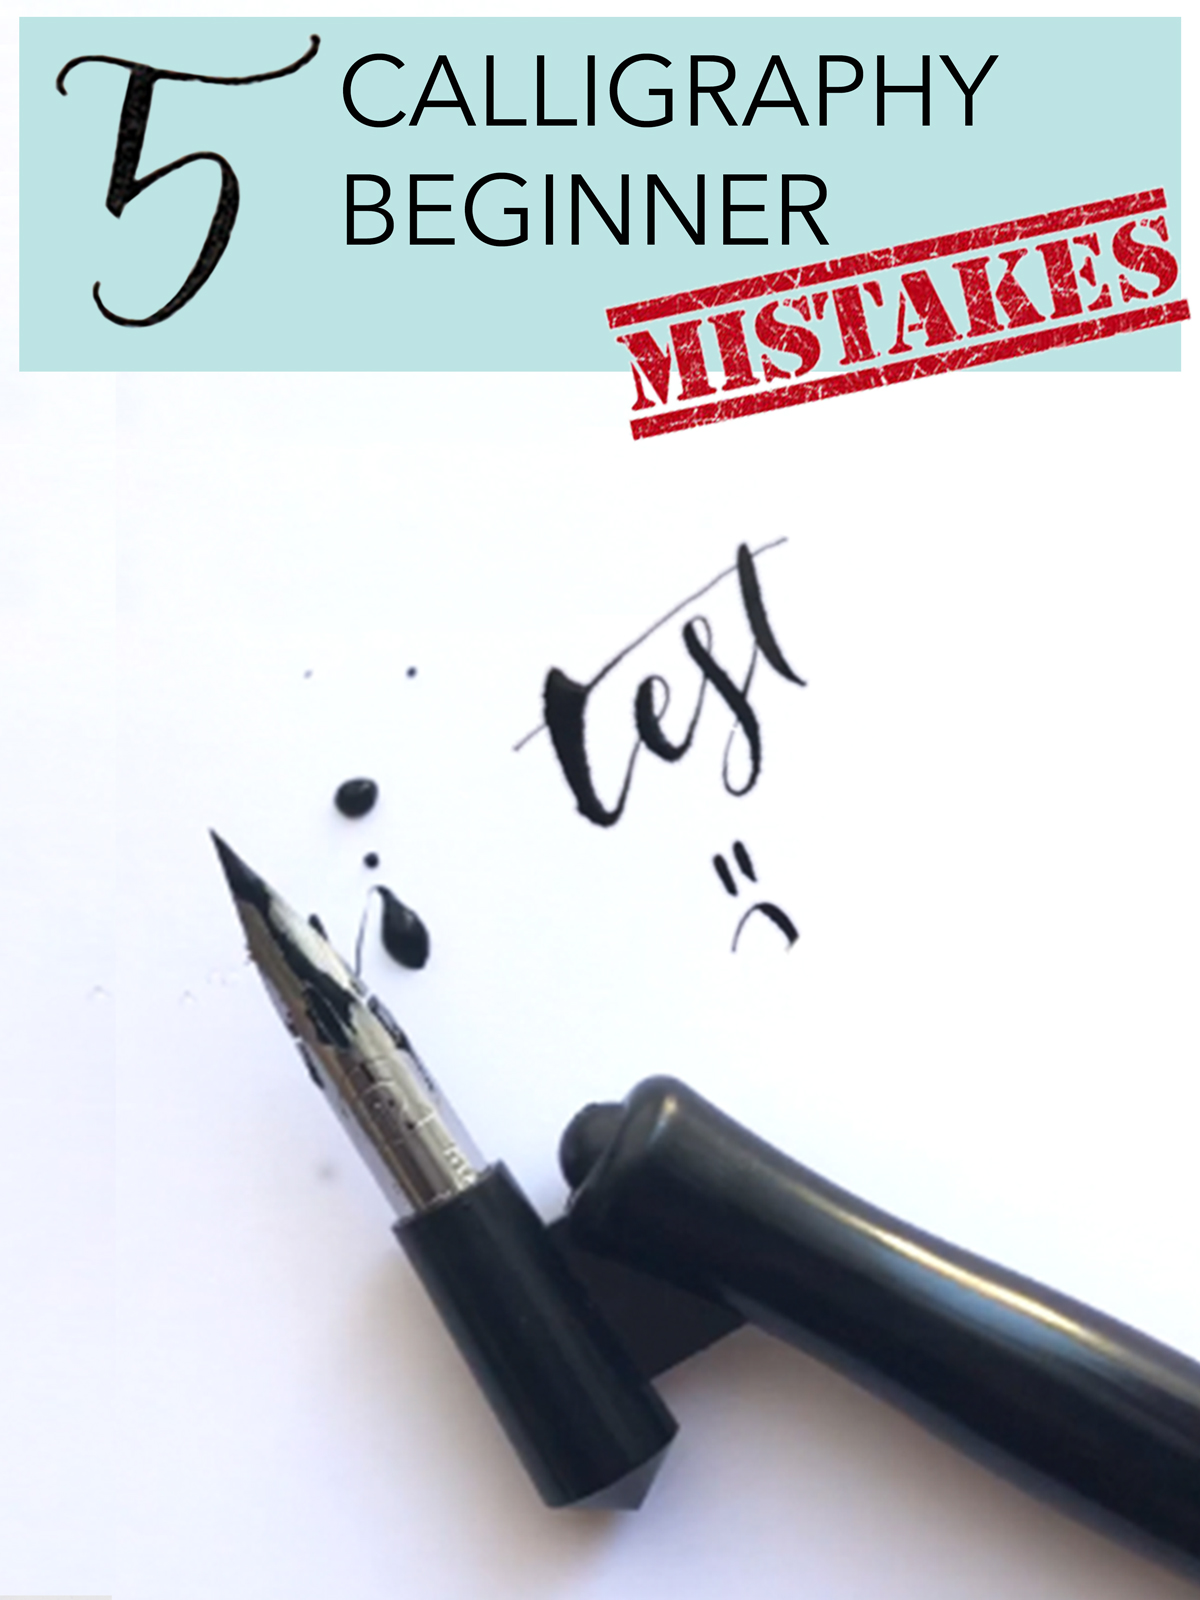 6 Calligraphy Beginner Mistakes (And How to Avoid Them)